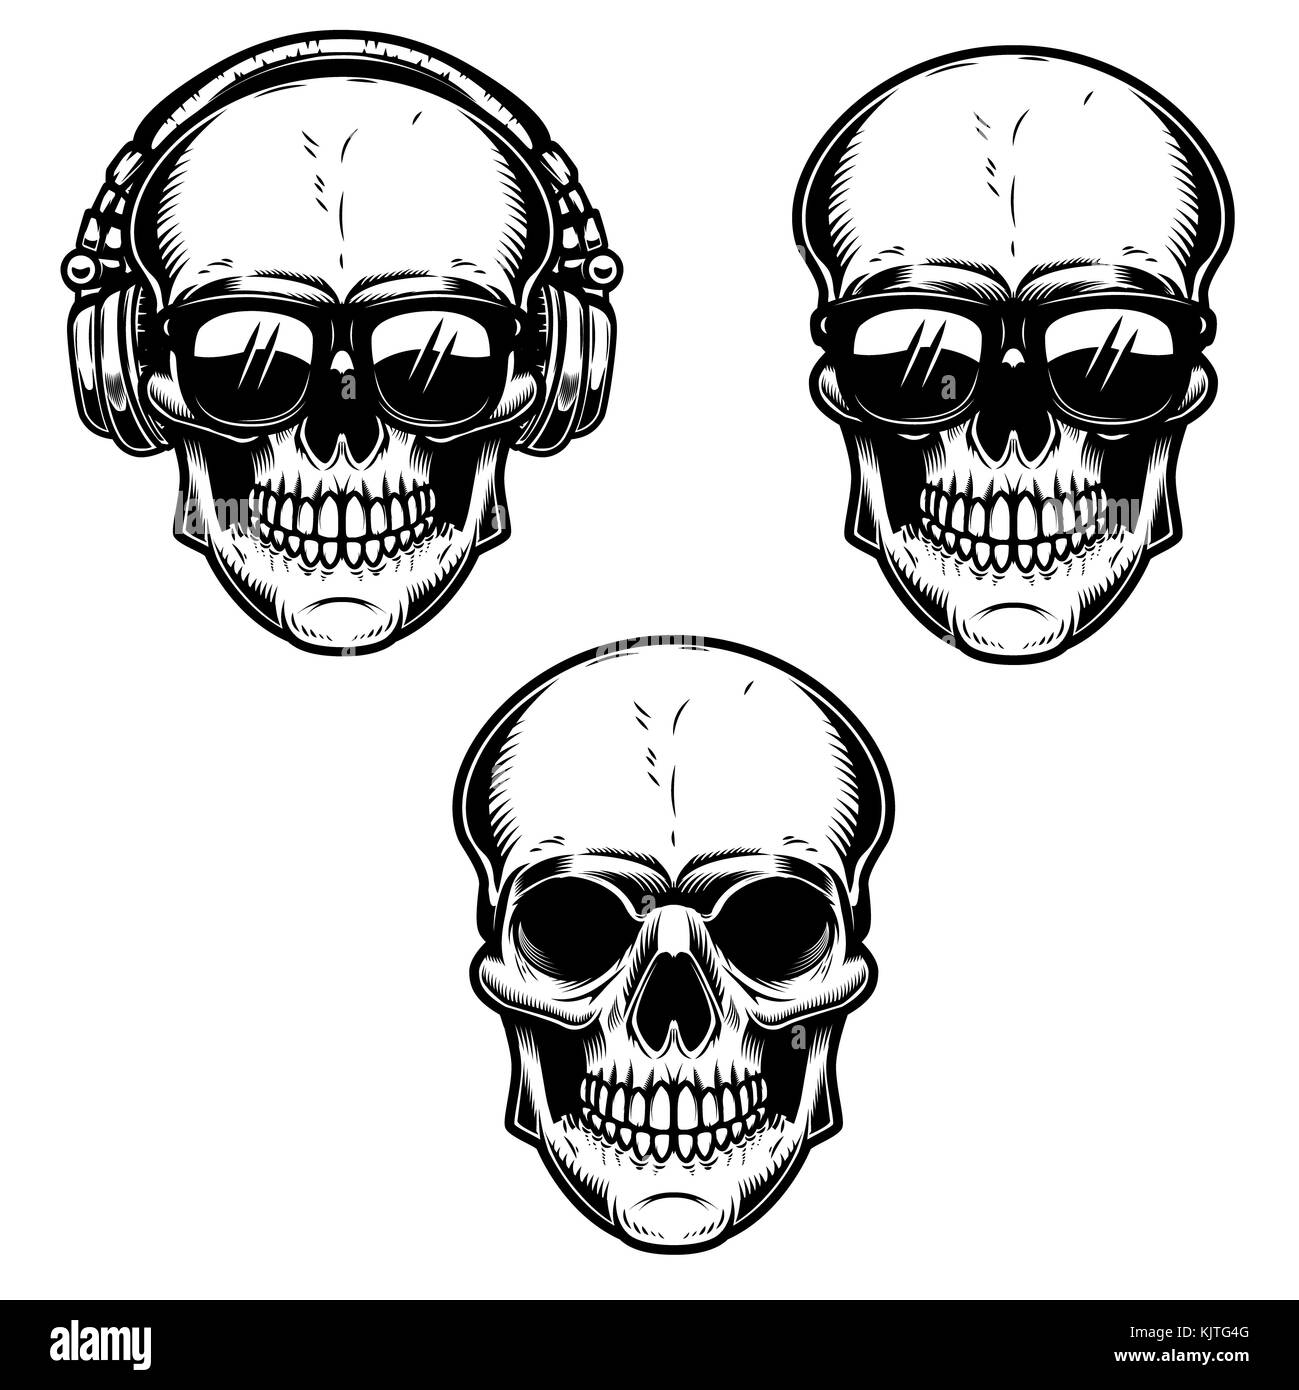 Set of the human skulls. Skull with headphones and sun glases isolated on white background. Design element for poster, emblem, t shirt. Vector illustr Stock Photo